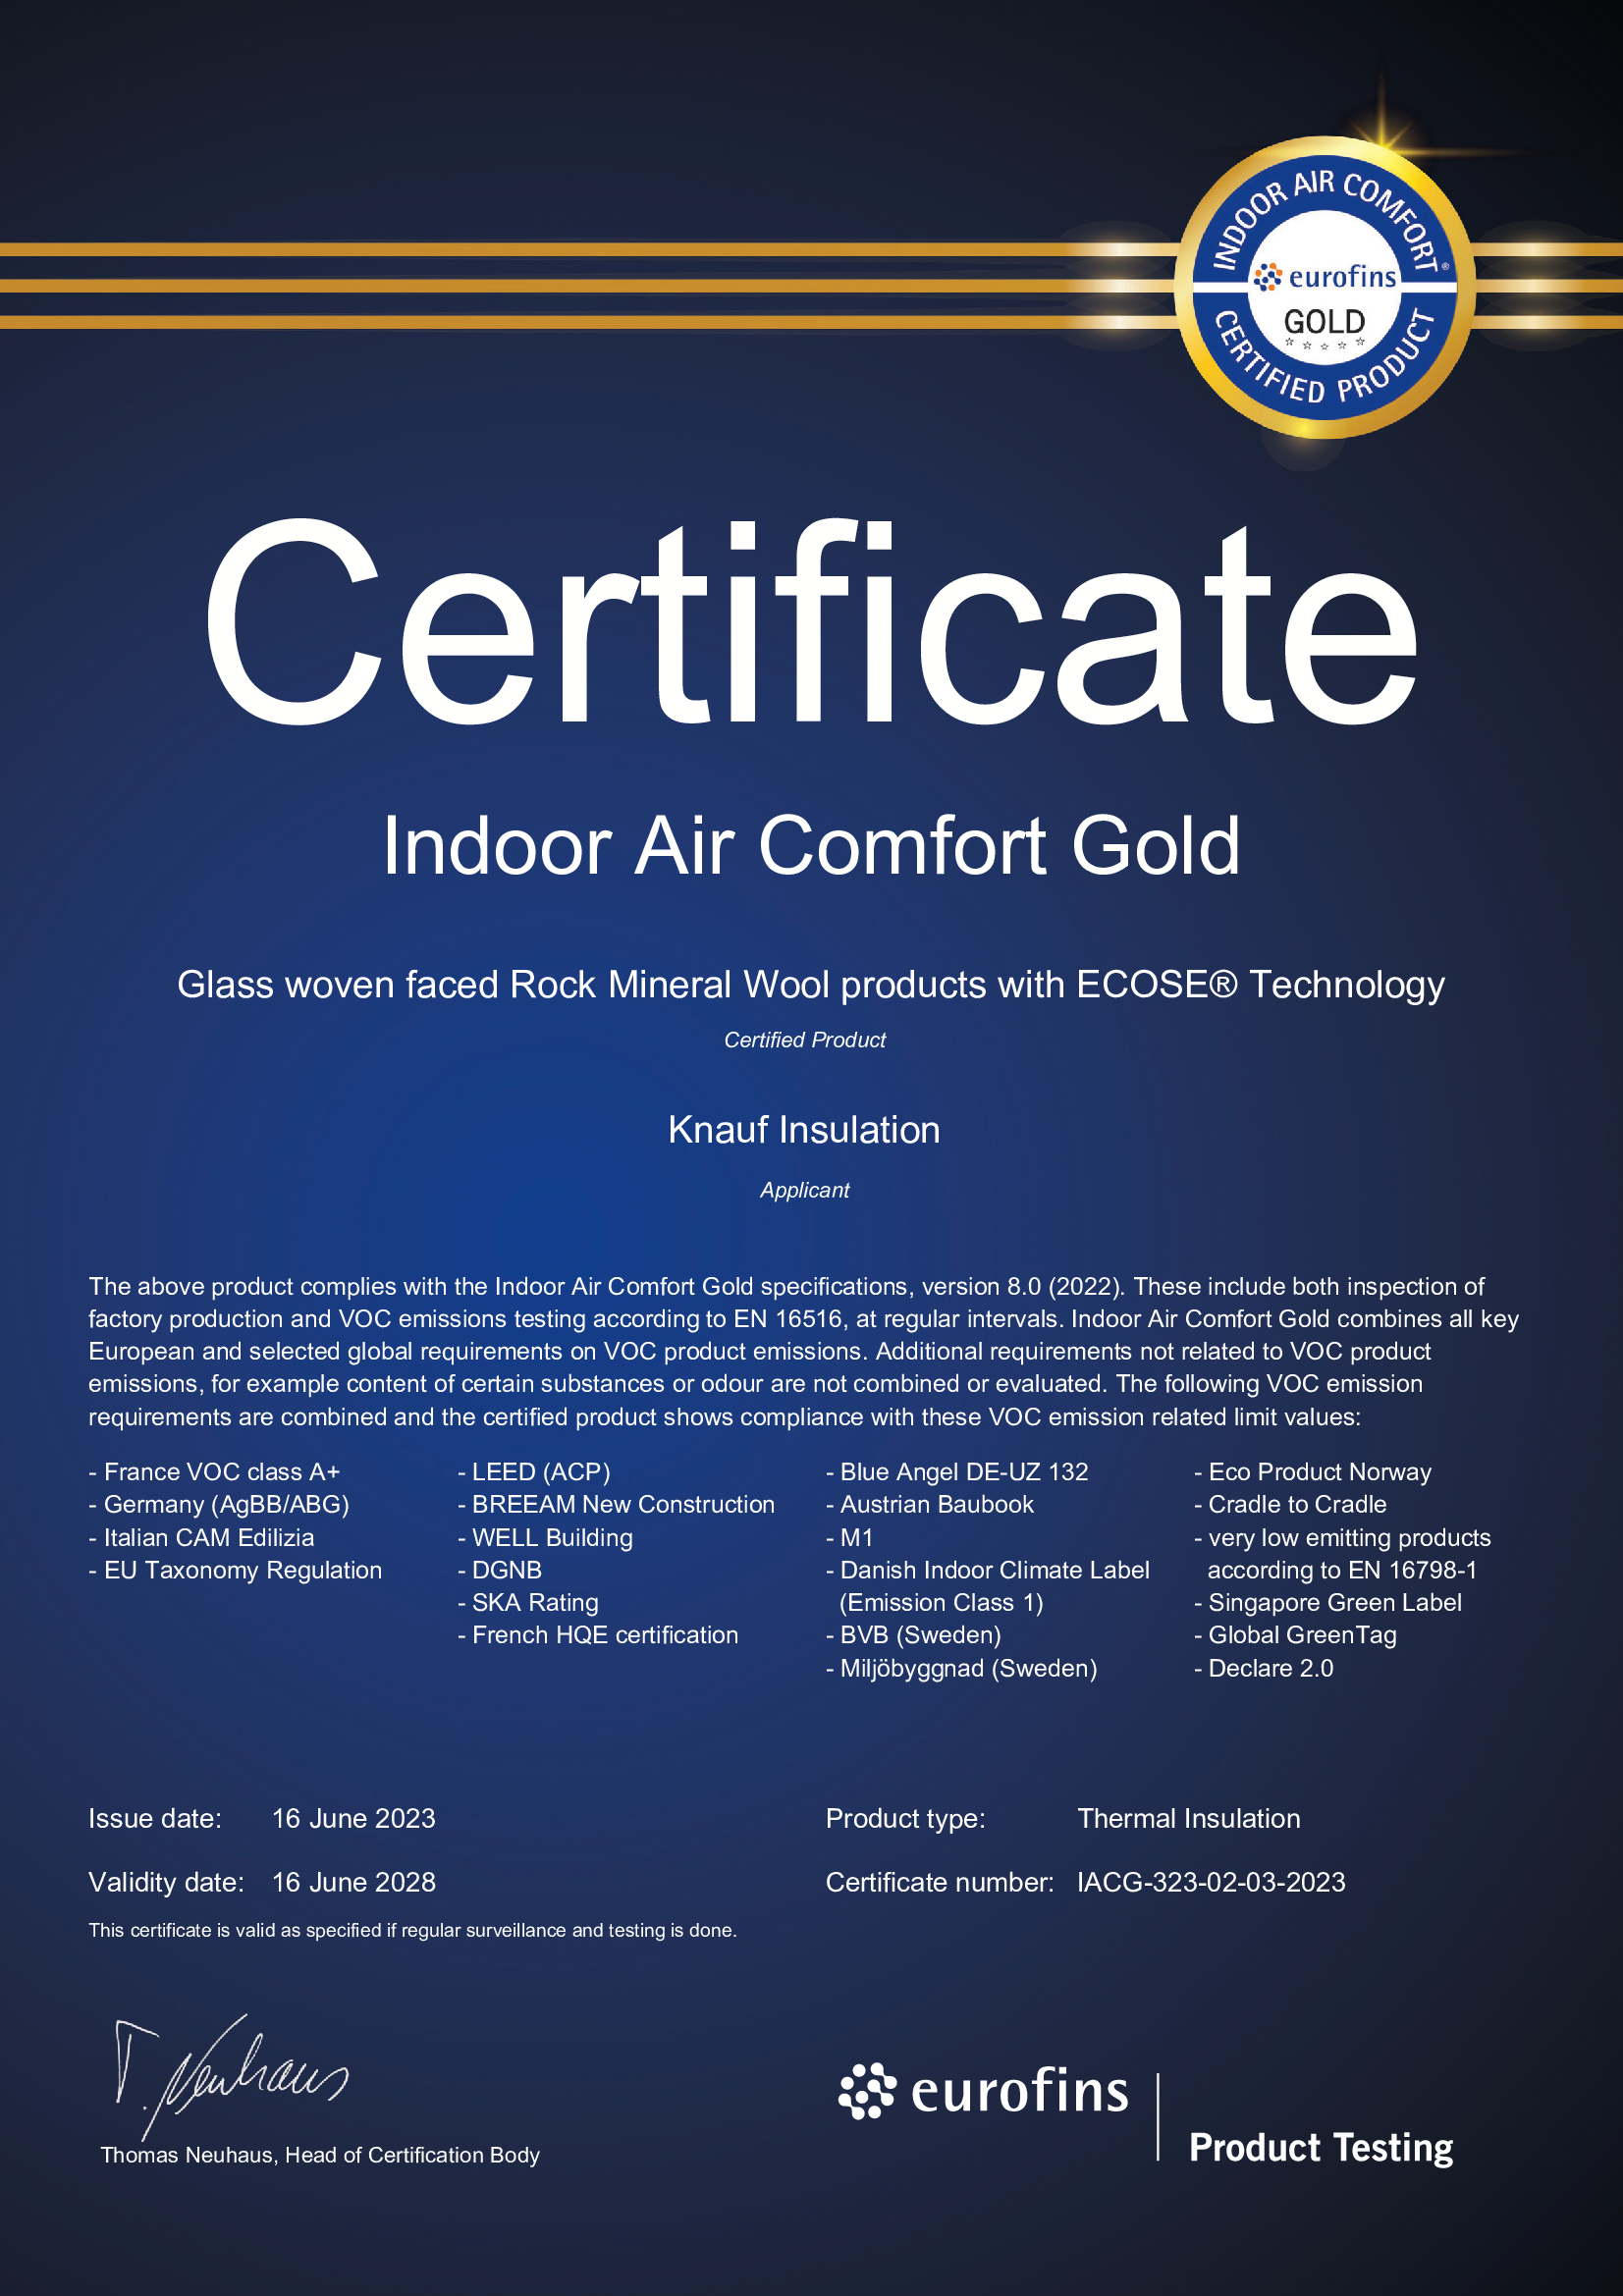 Indoor Air Quality (IAO) eurofins GOLD Novi Marof  (glas woven  faced RMW products)